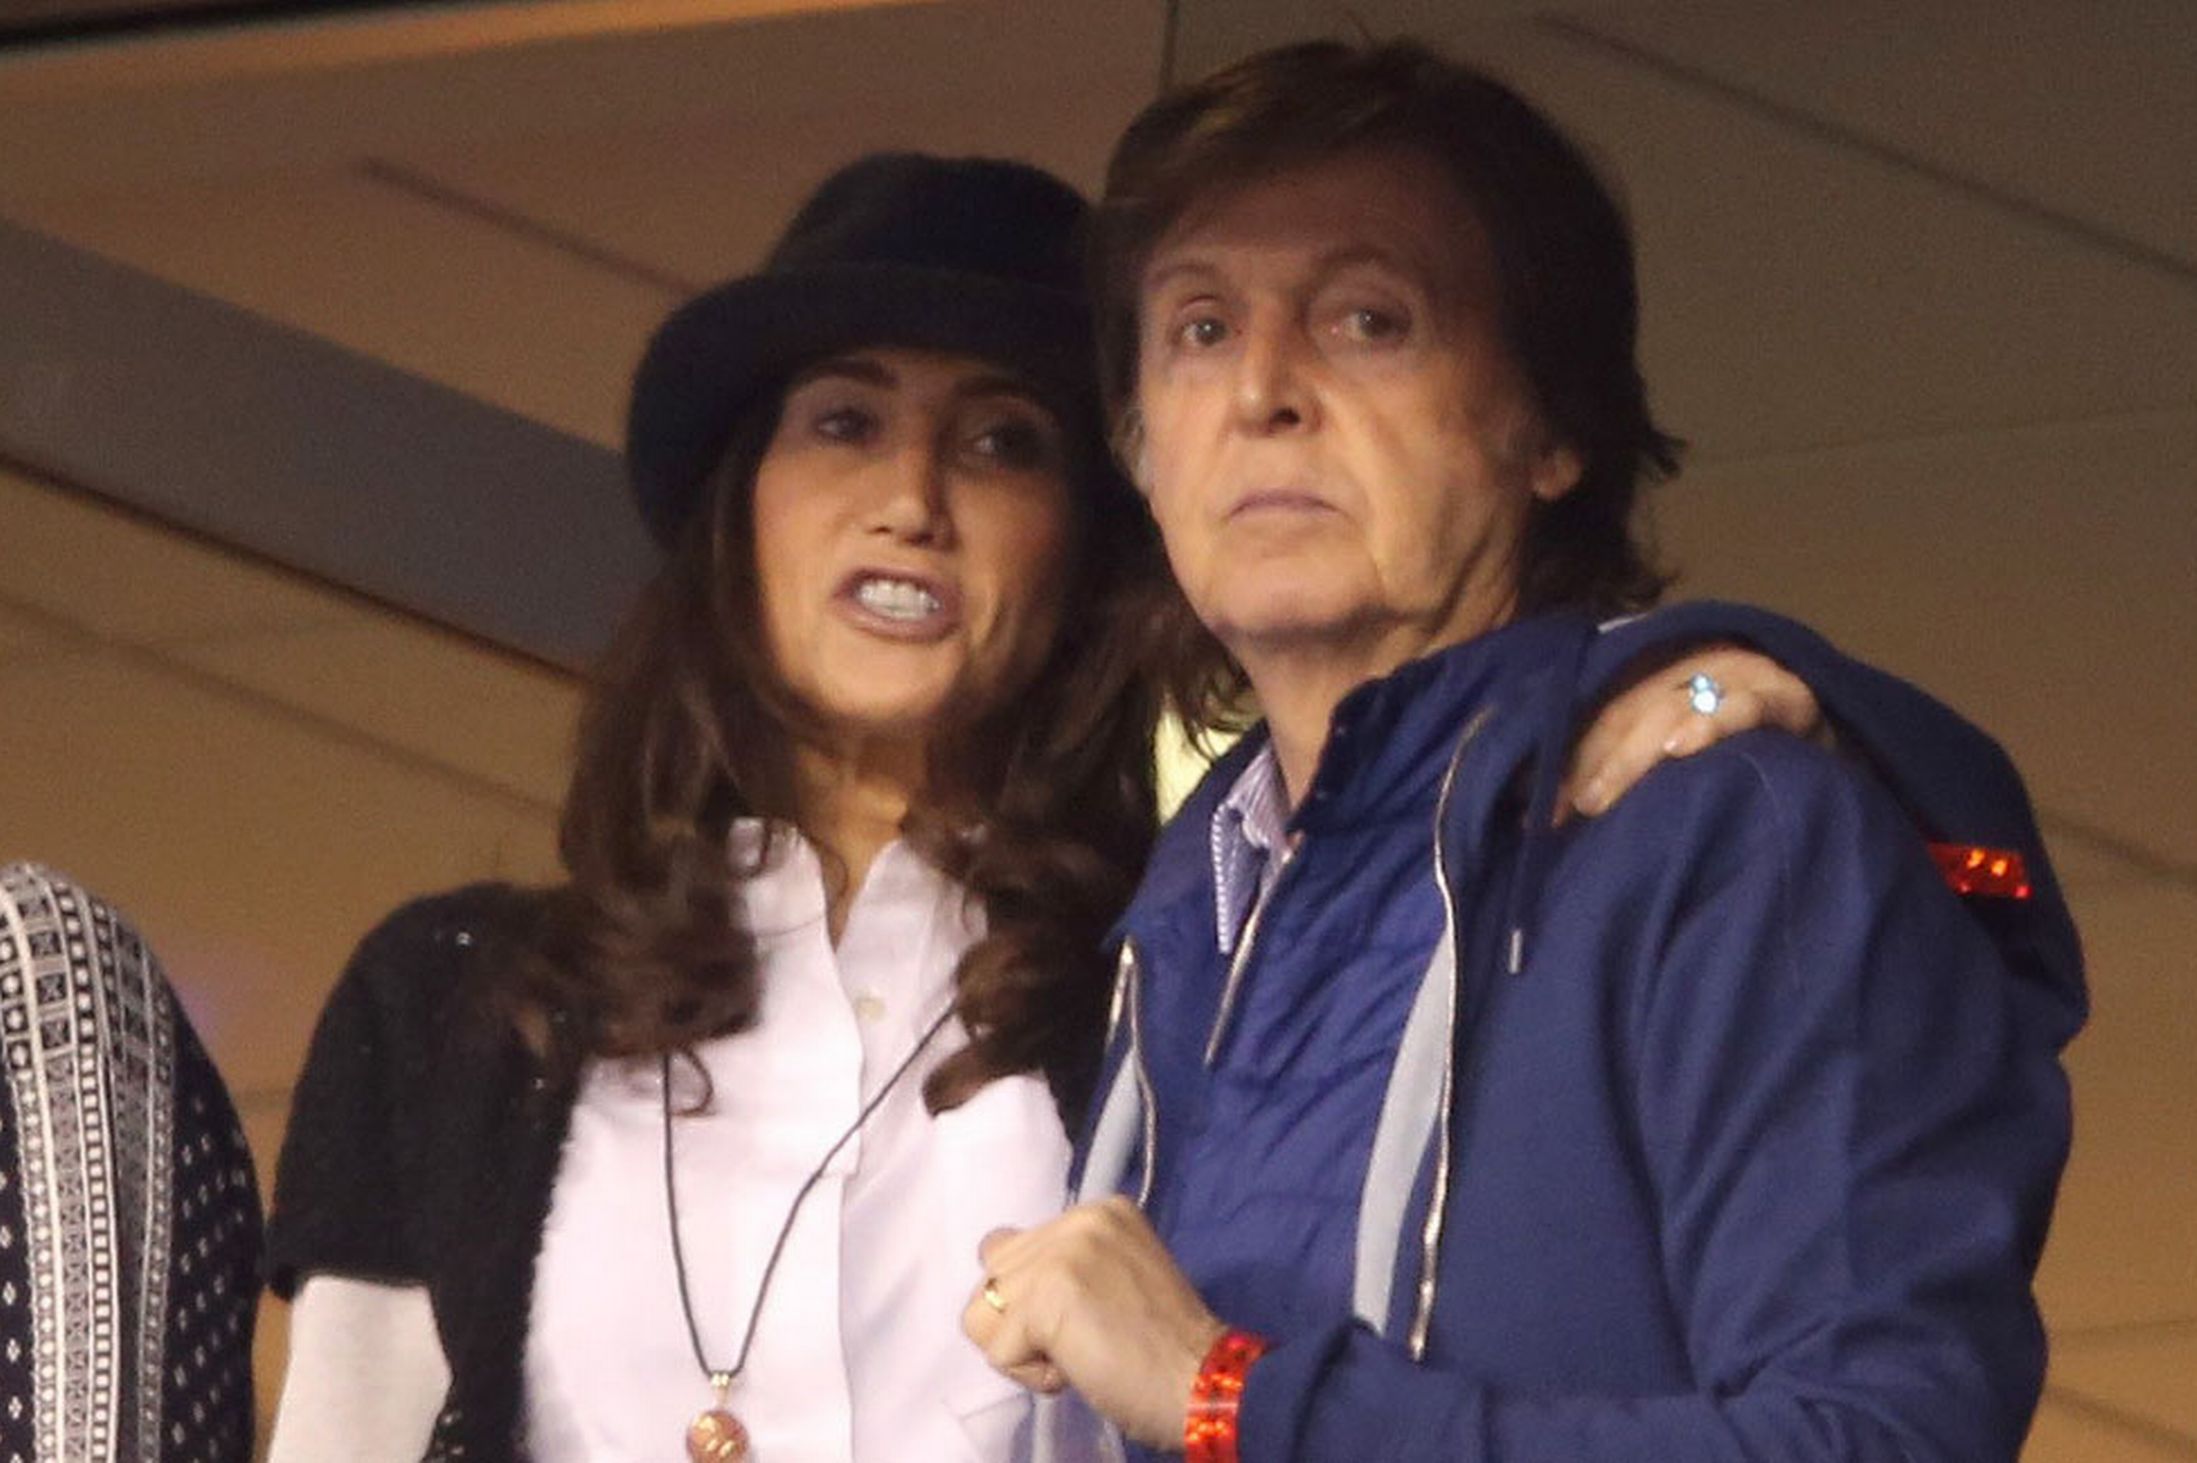 Sir Paul McCartney and Nancy Shevell. THANKS FOR VIEWING!!!